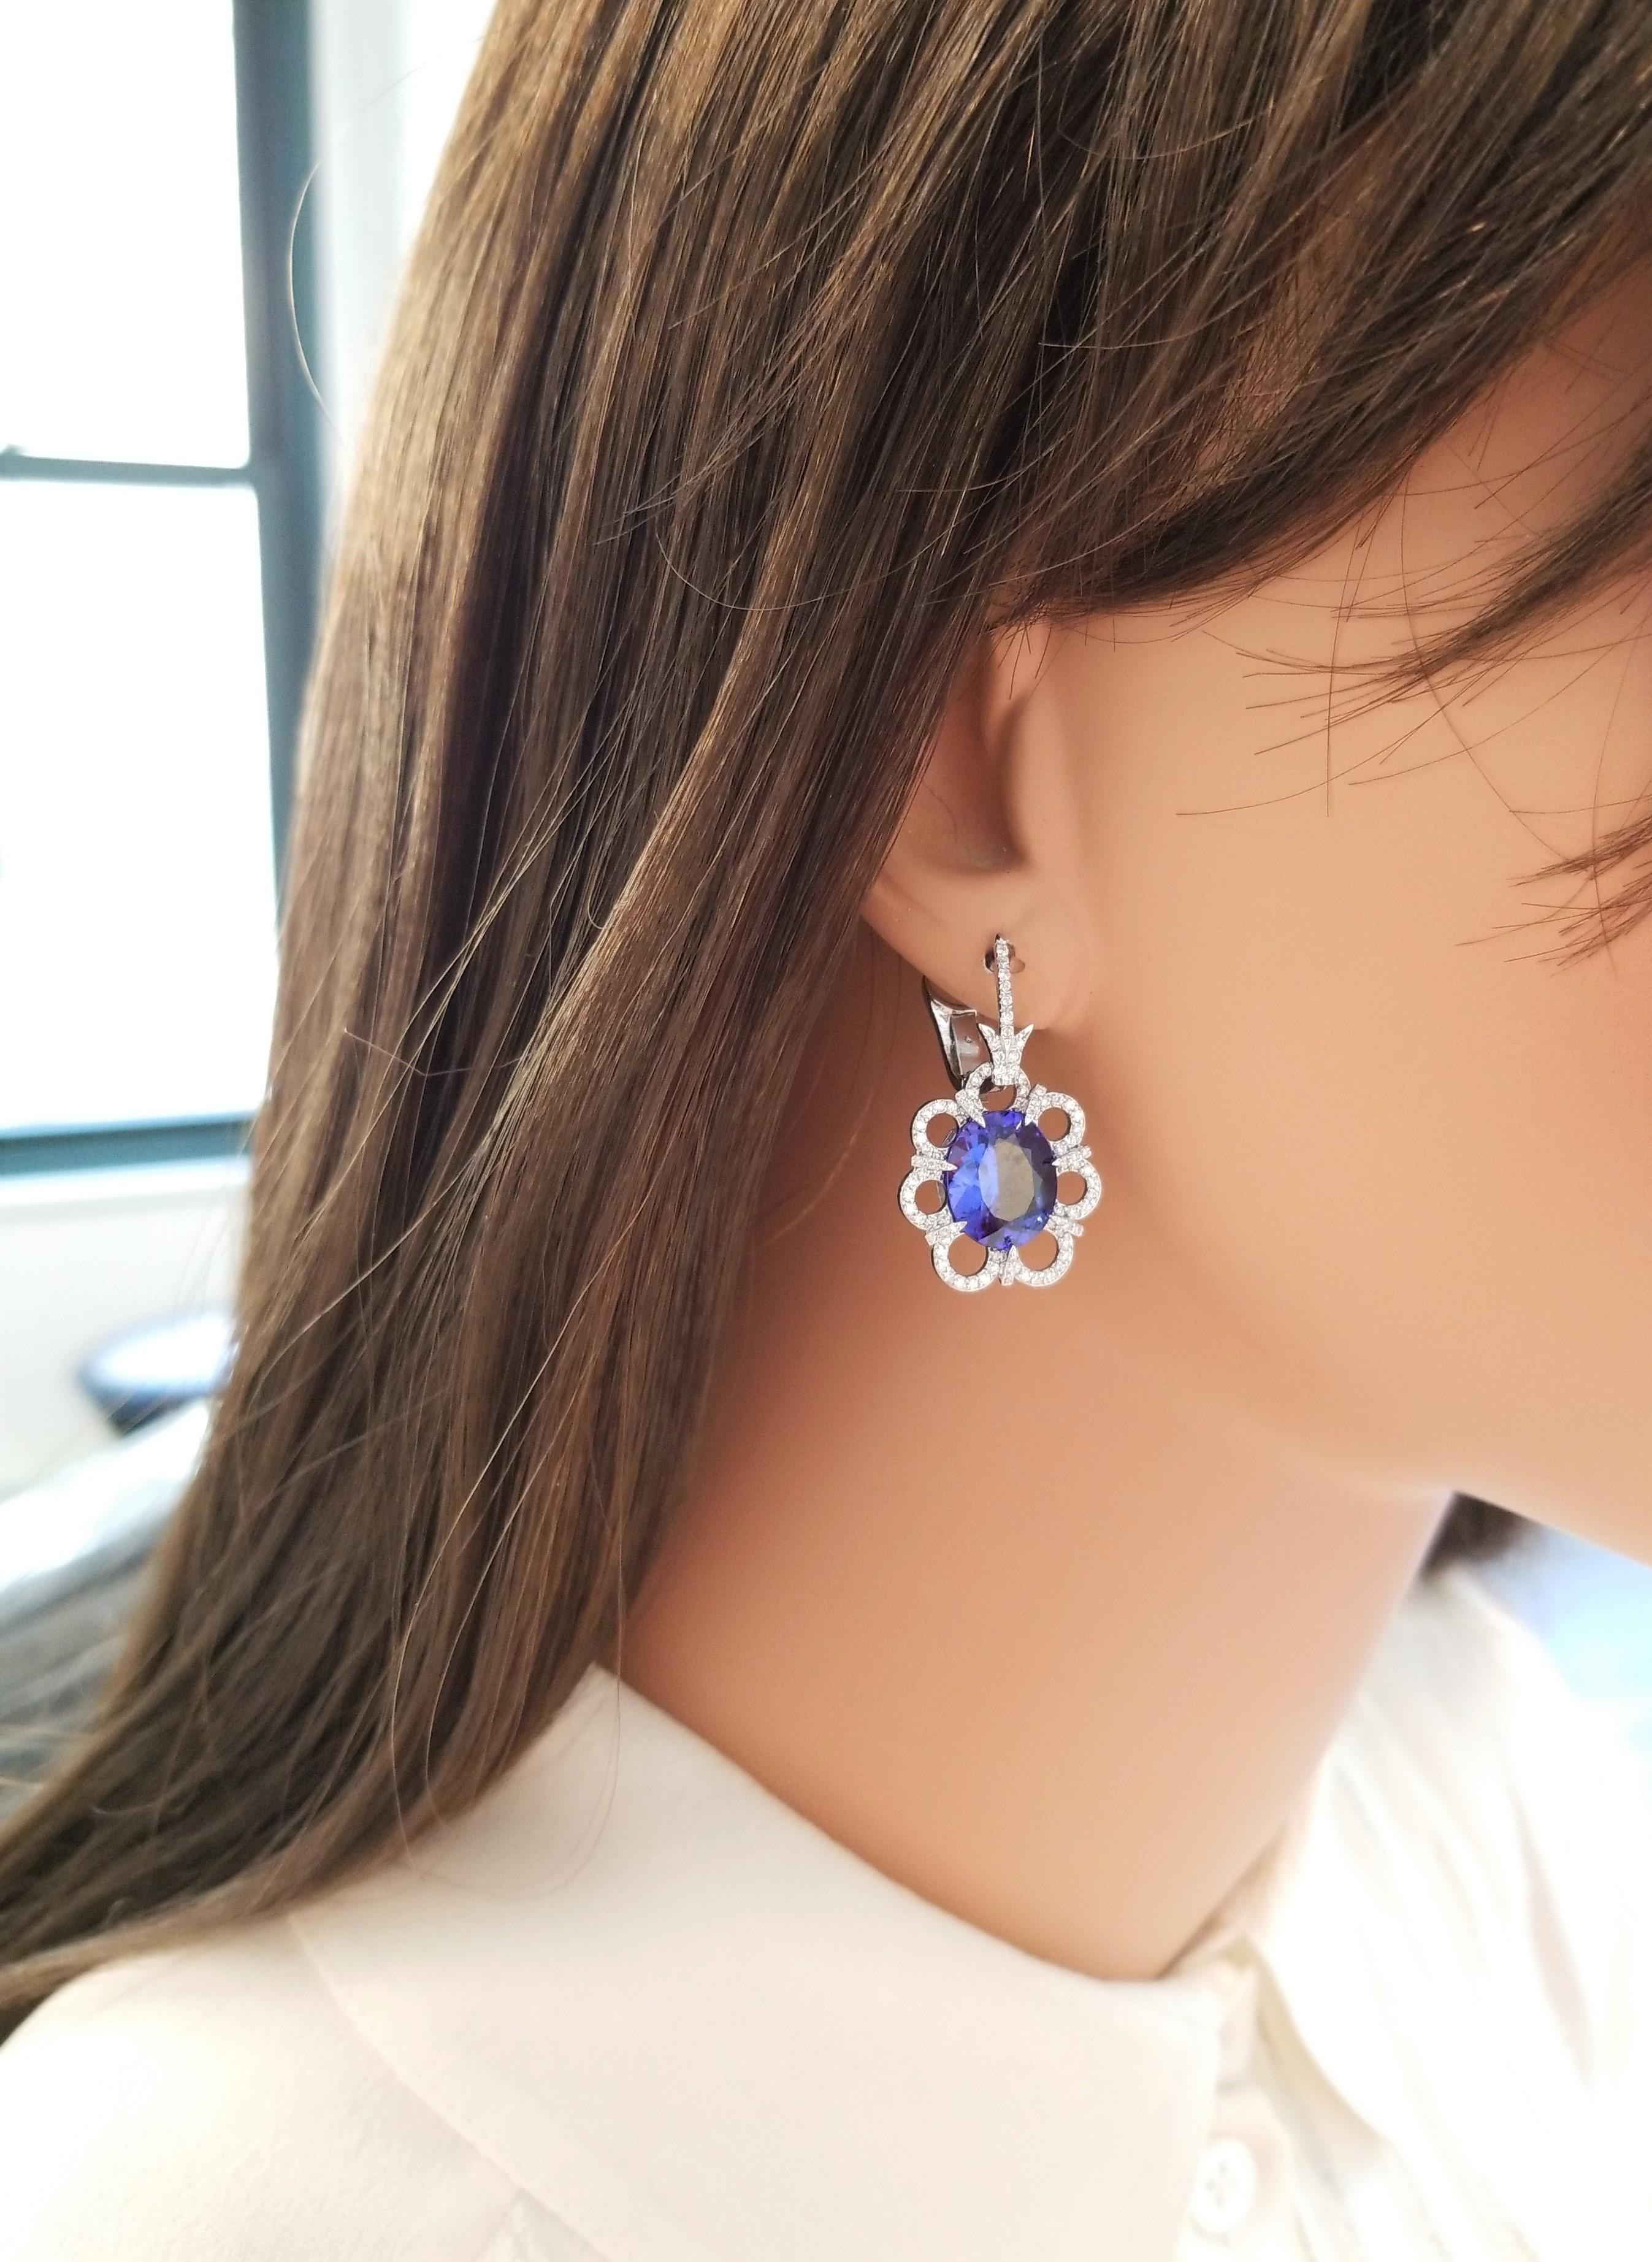 These statement earrings have two oval-cut, vivid blue-violet tanzanites totaling 9.30 carats expertly set into diamond prong settings. The gem source is near the foothills of Mt. Kilimanjaro in Tanzania. The saturation is what you want; its